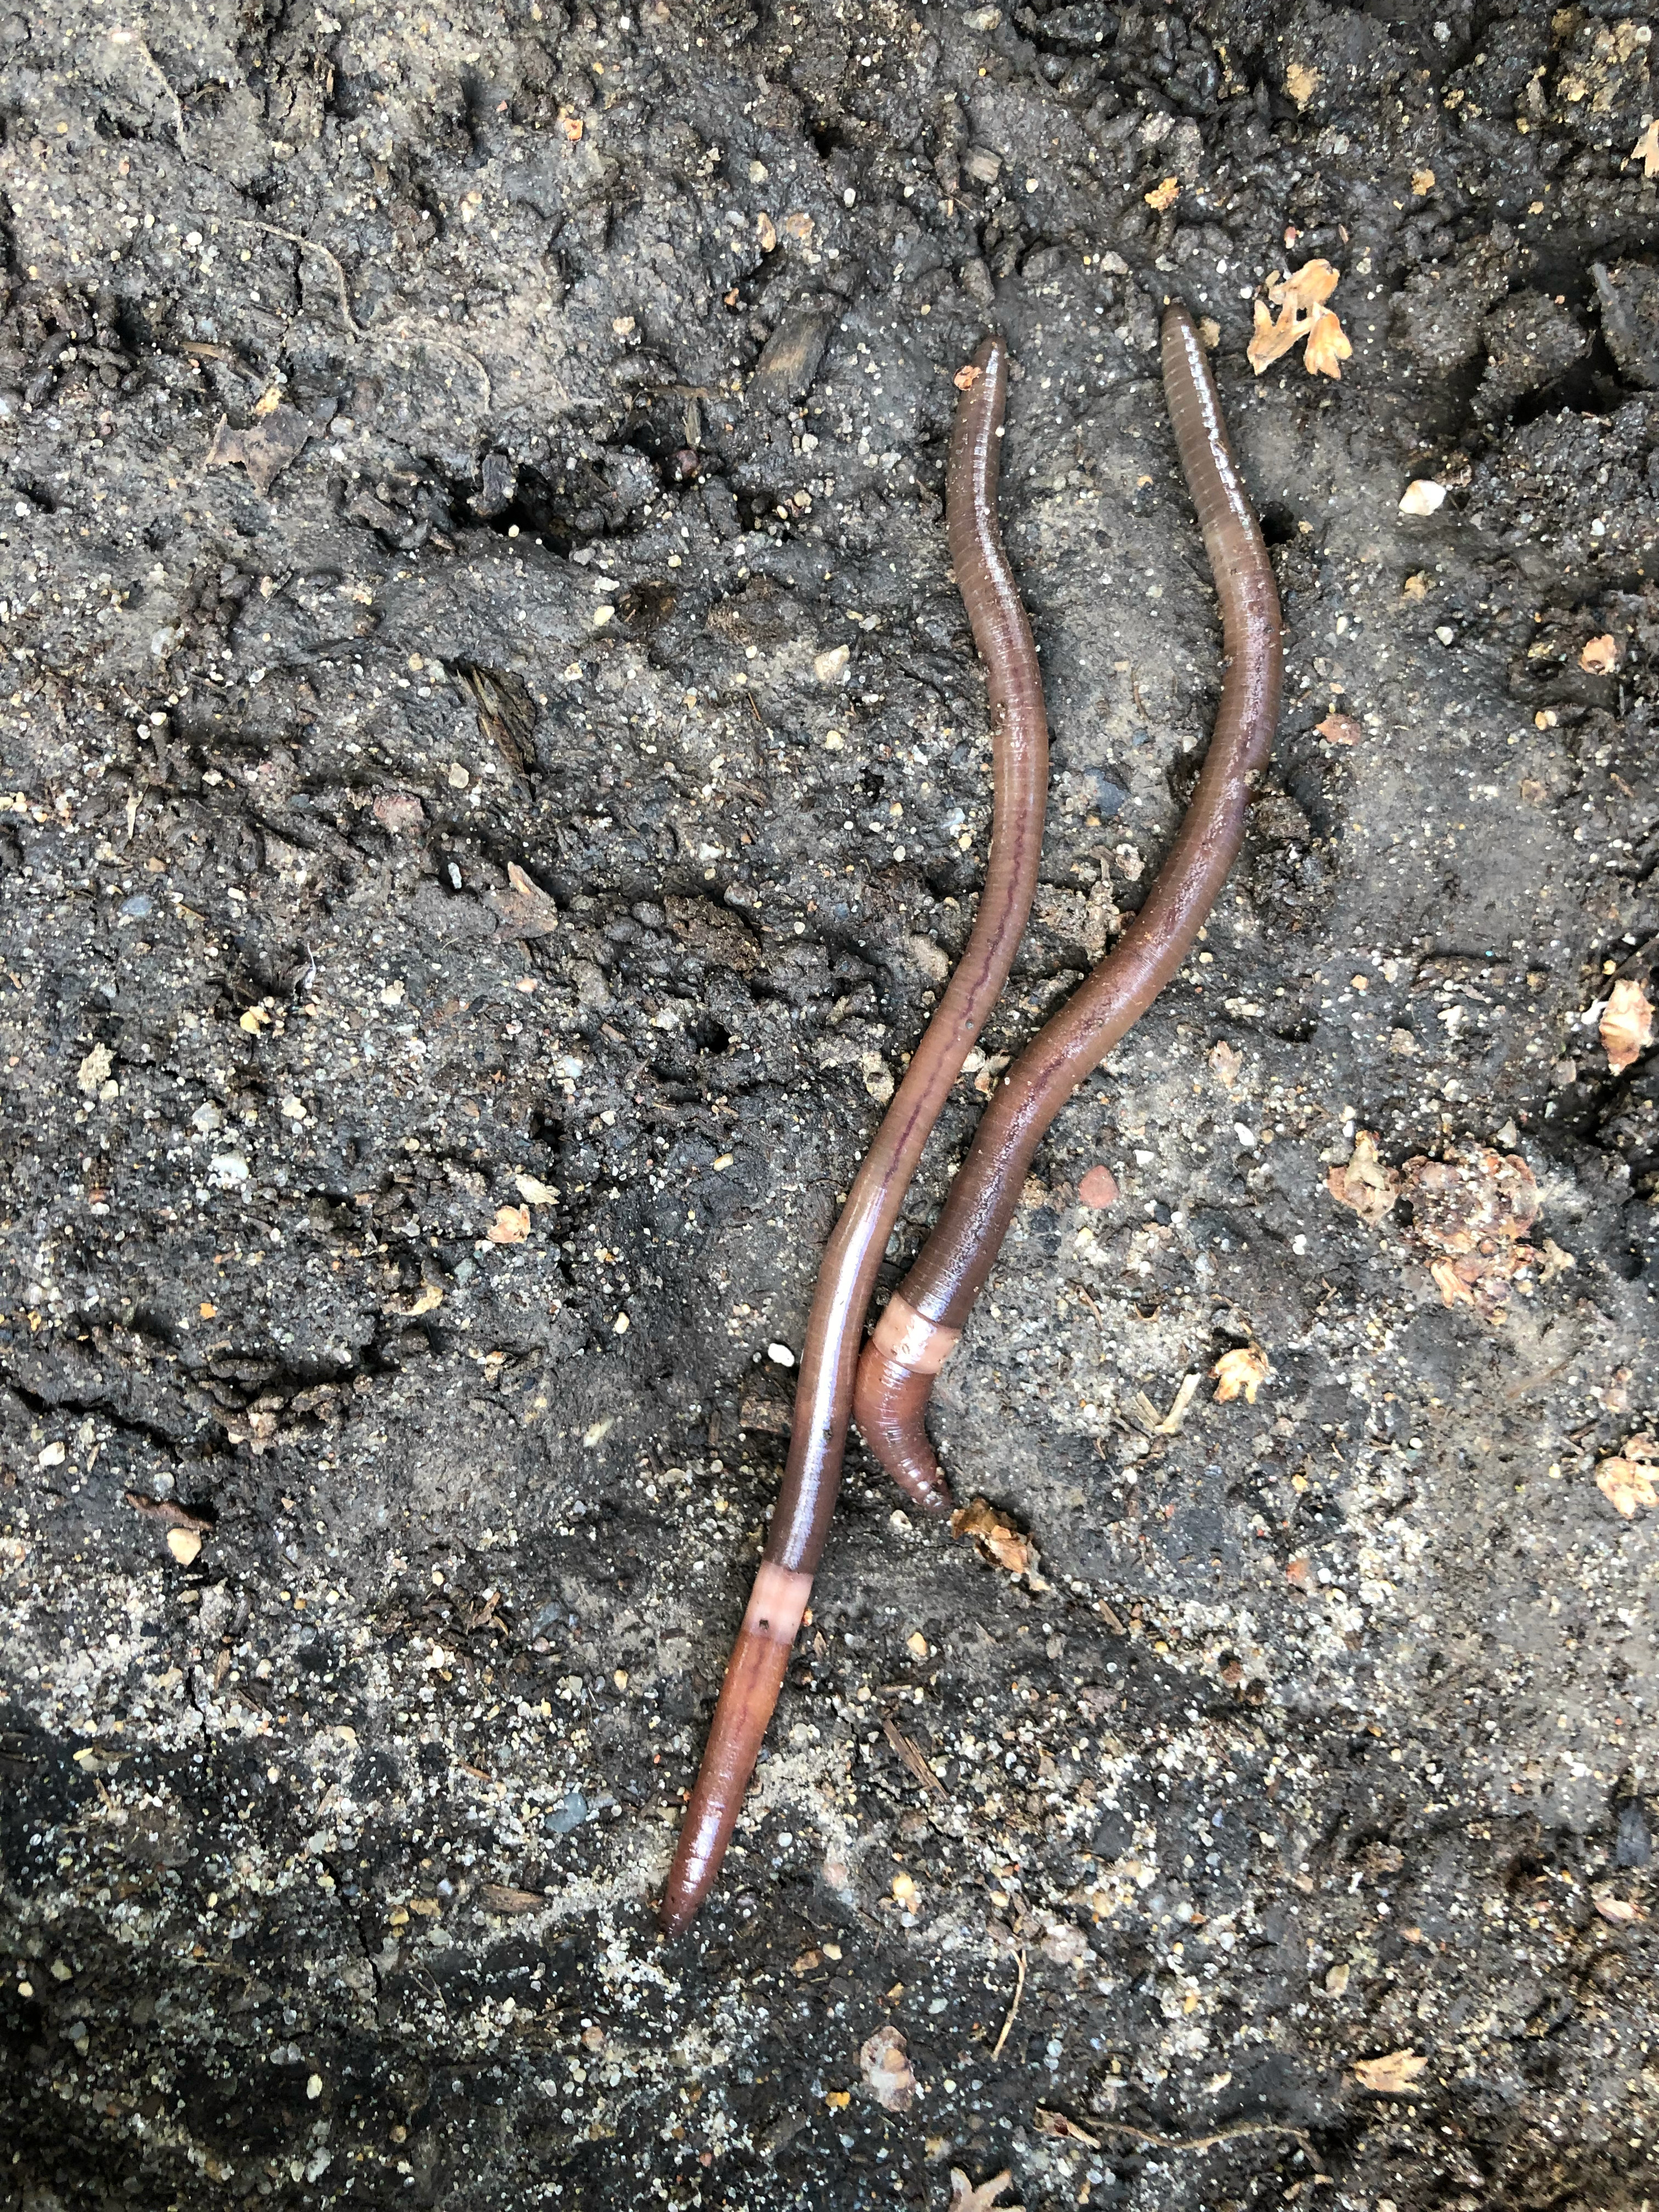 jumping worm in soil